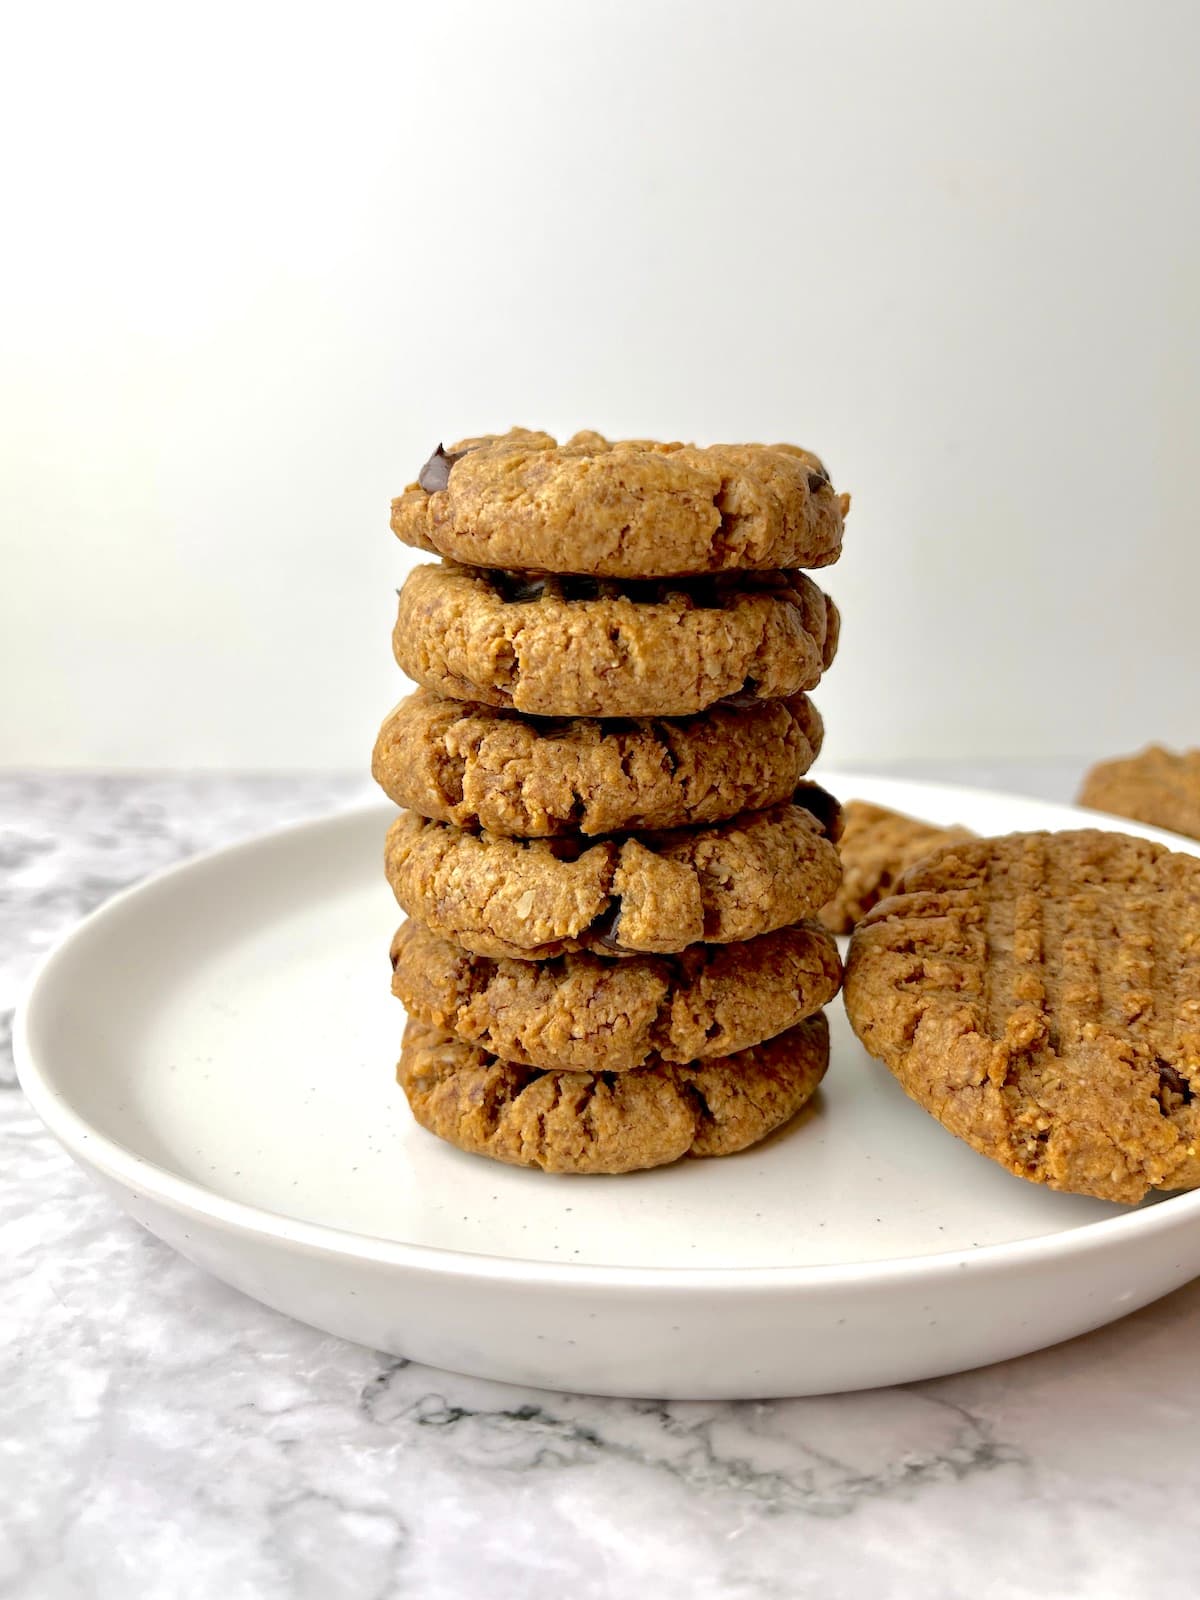 A stack of vegan almond butter cookies on a white plate.